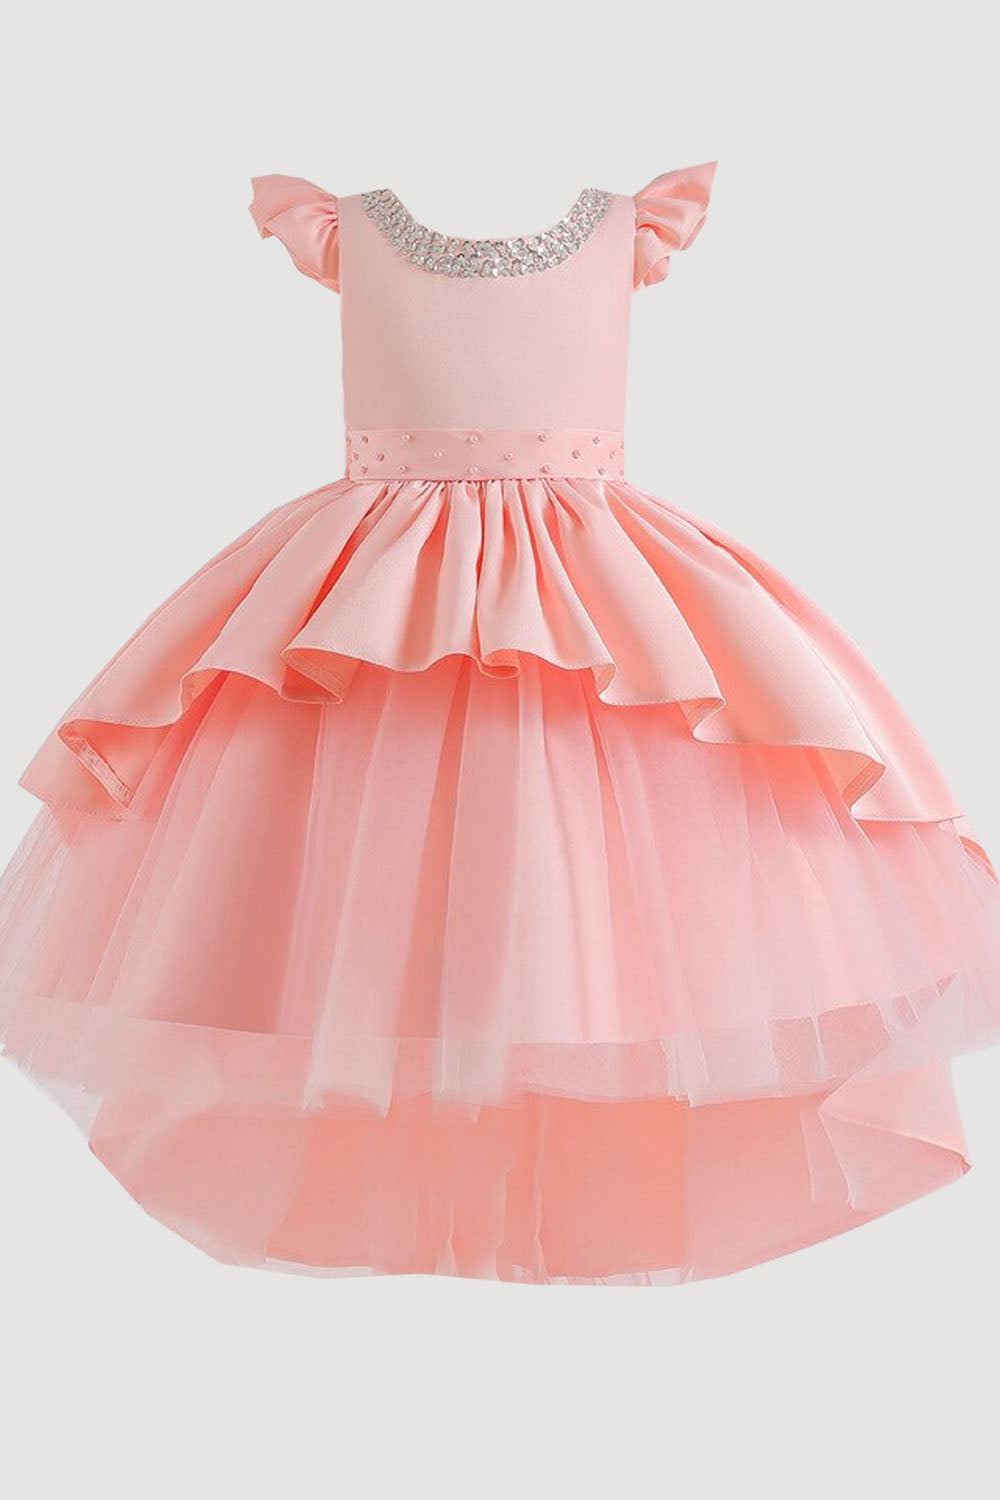 GIRLS - Pink Satin and Tulle Party Dress - Hannah Rose Vintage Boutique